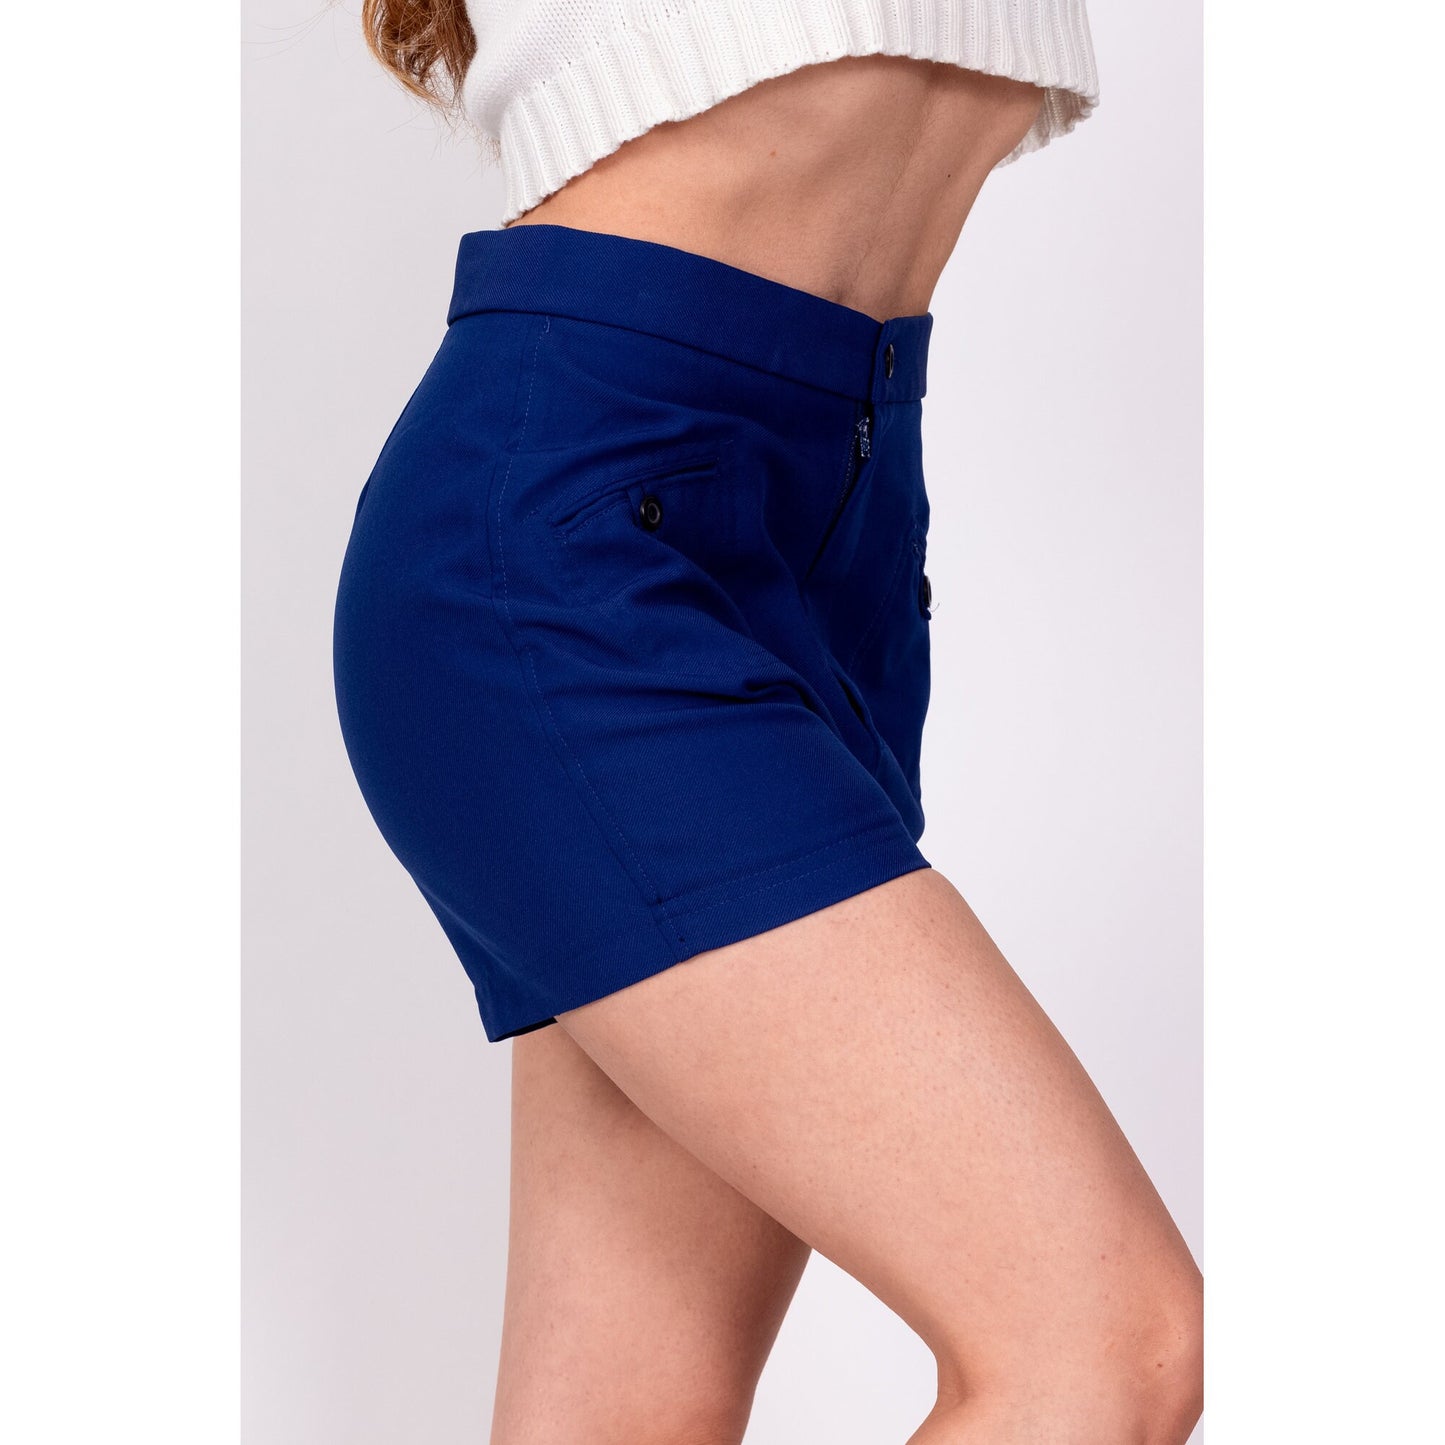 70s Royal Blue High Waisted Shorts - XS to Petite Small, 25.5" 